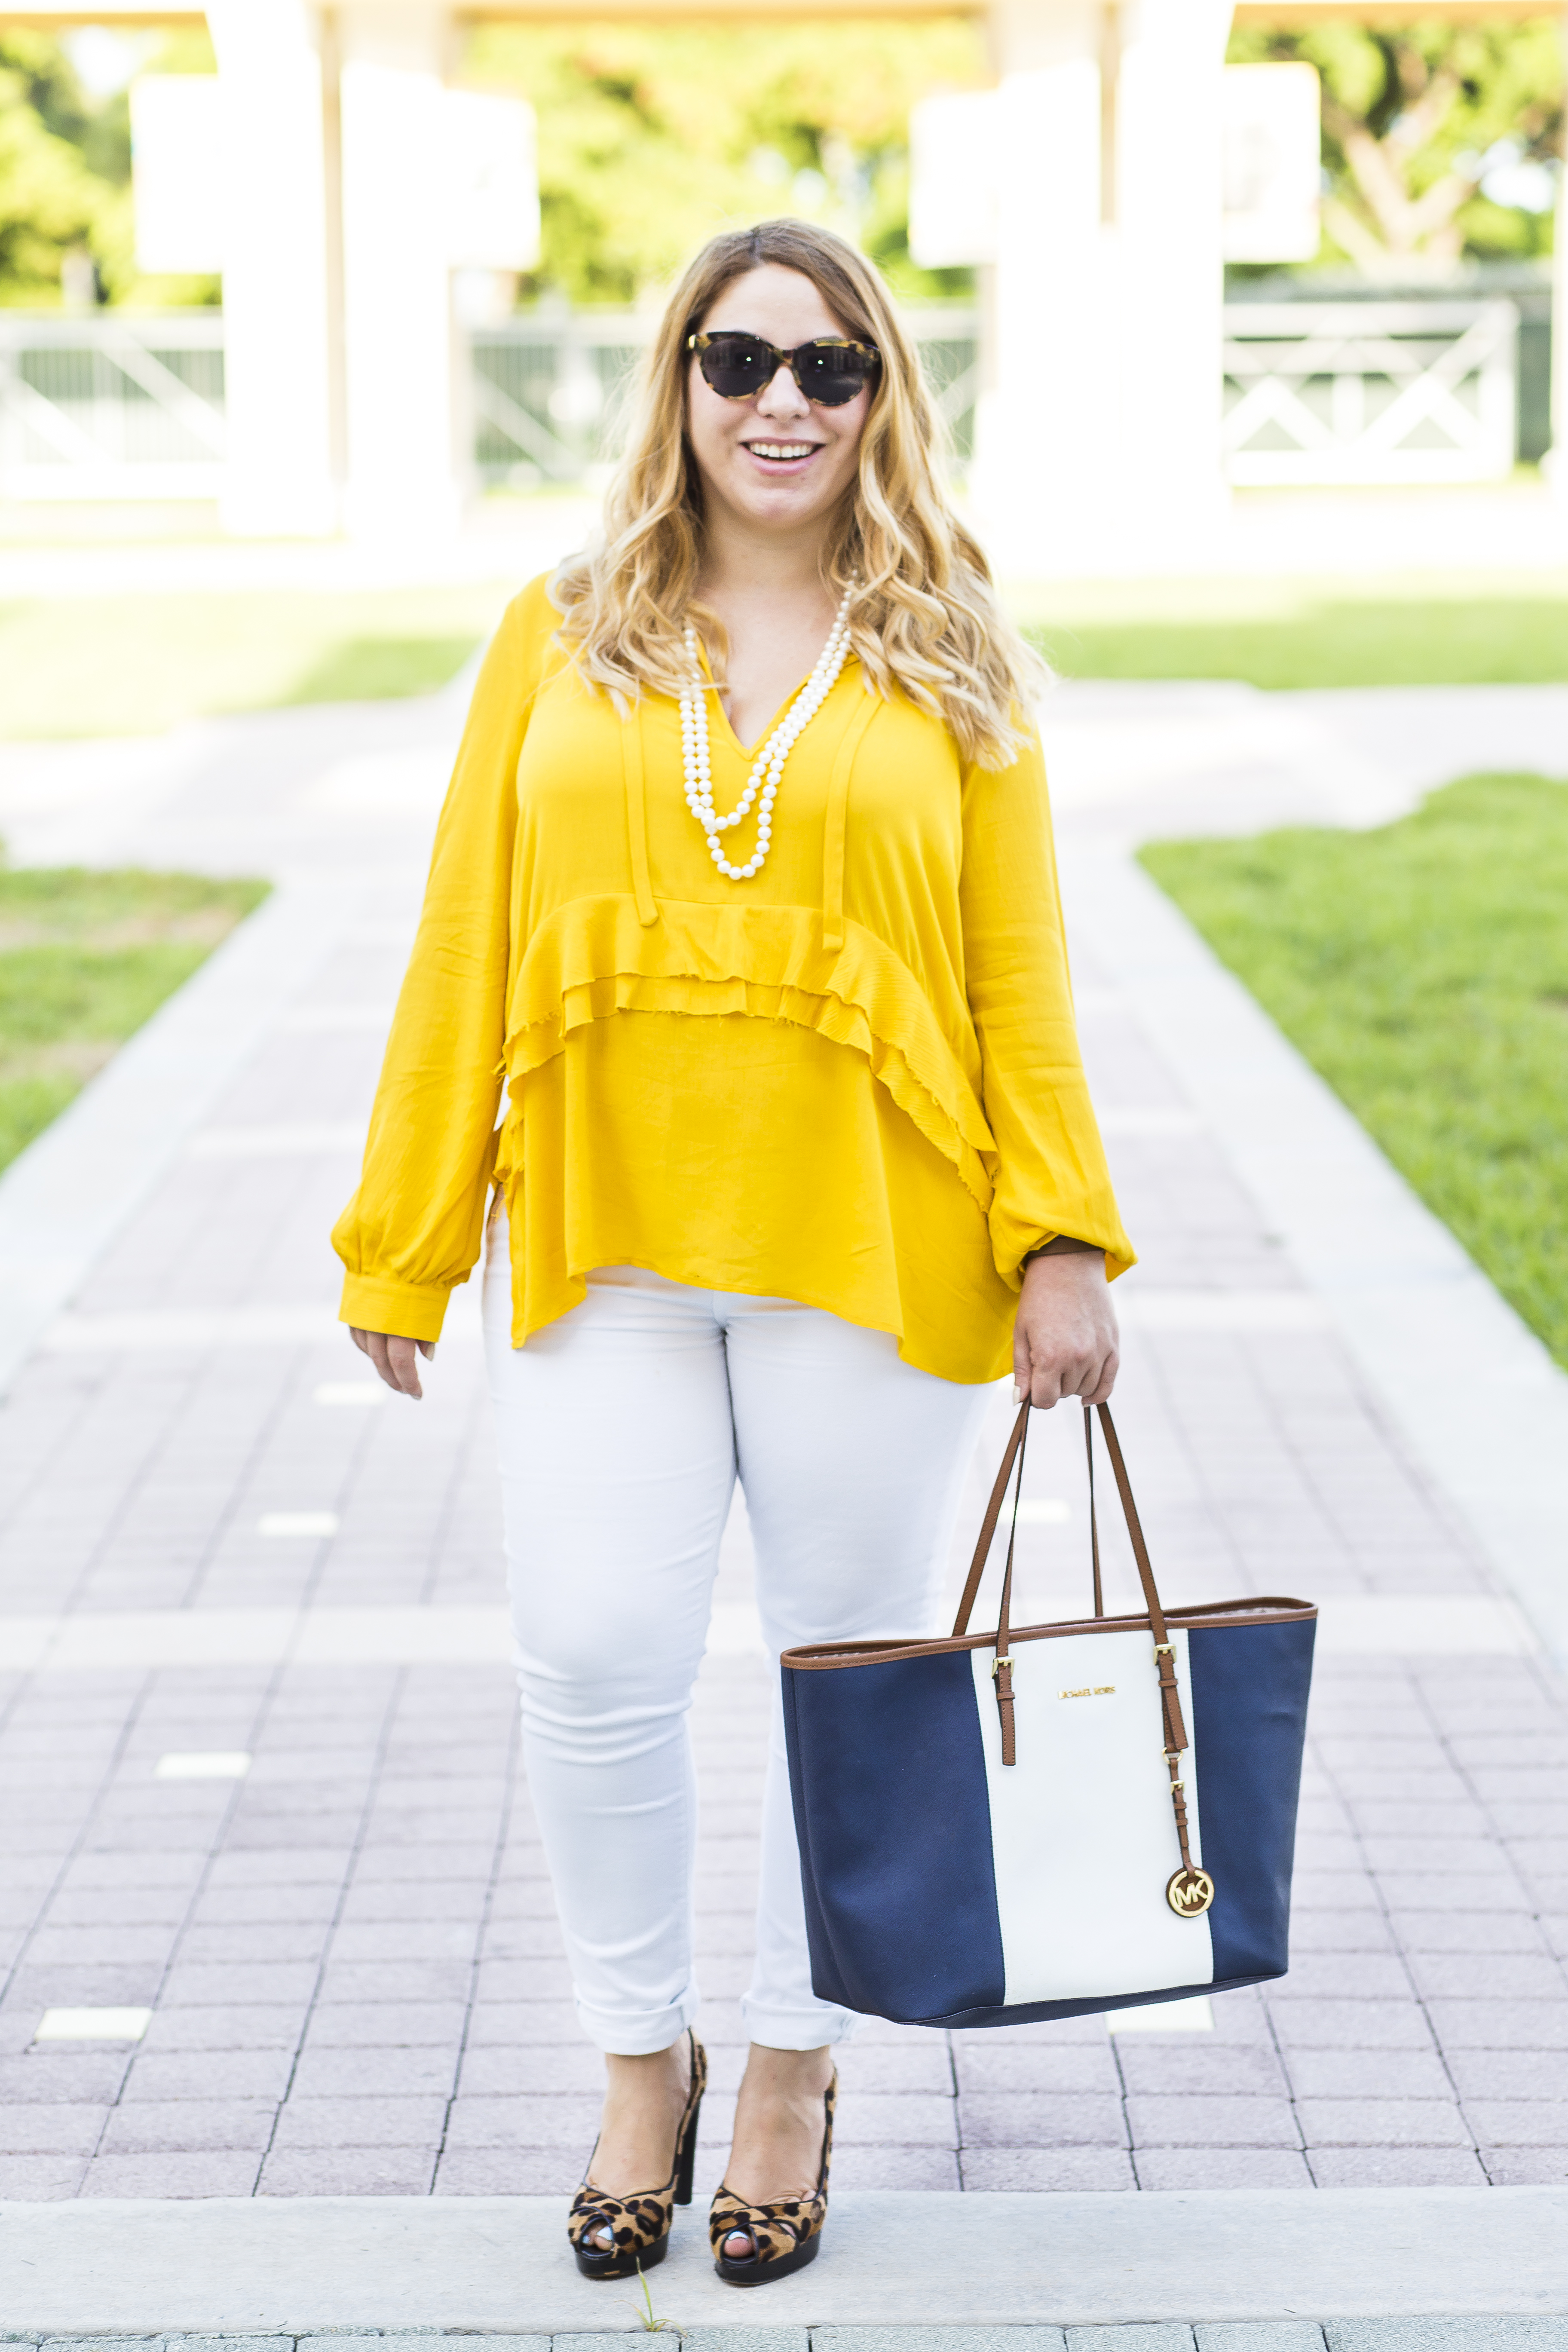 How to wear yellow in fall